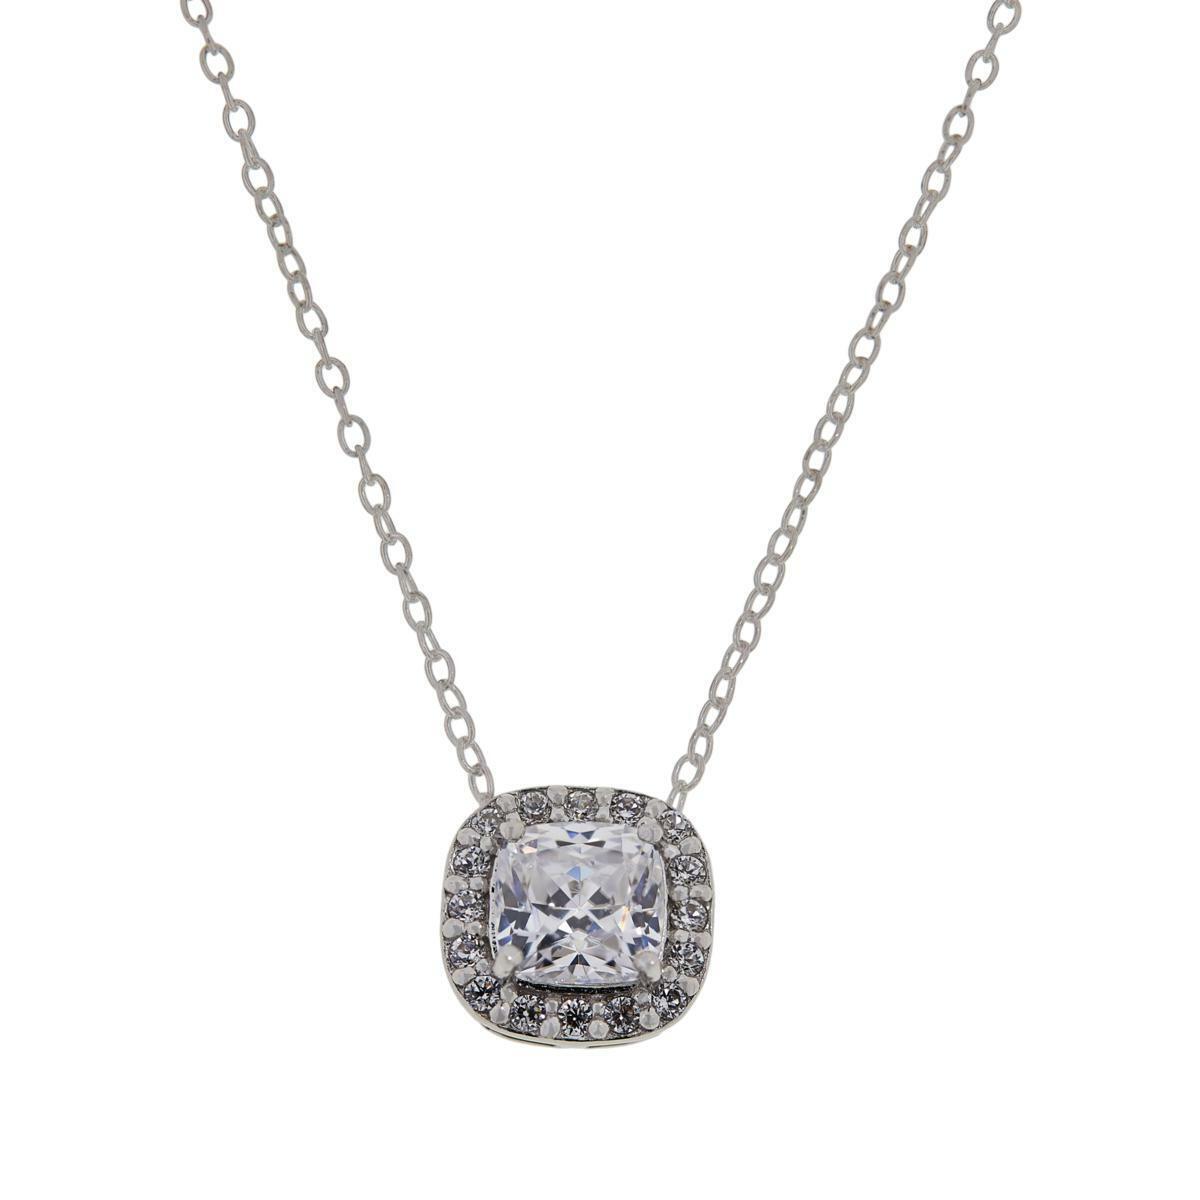 Absolute Sterling Silver Cubic Zirconia Halo Square Pendant with 18" Chain